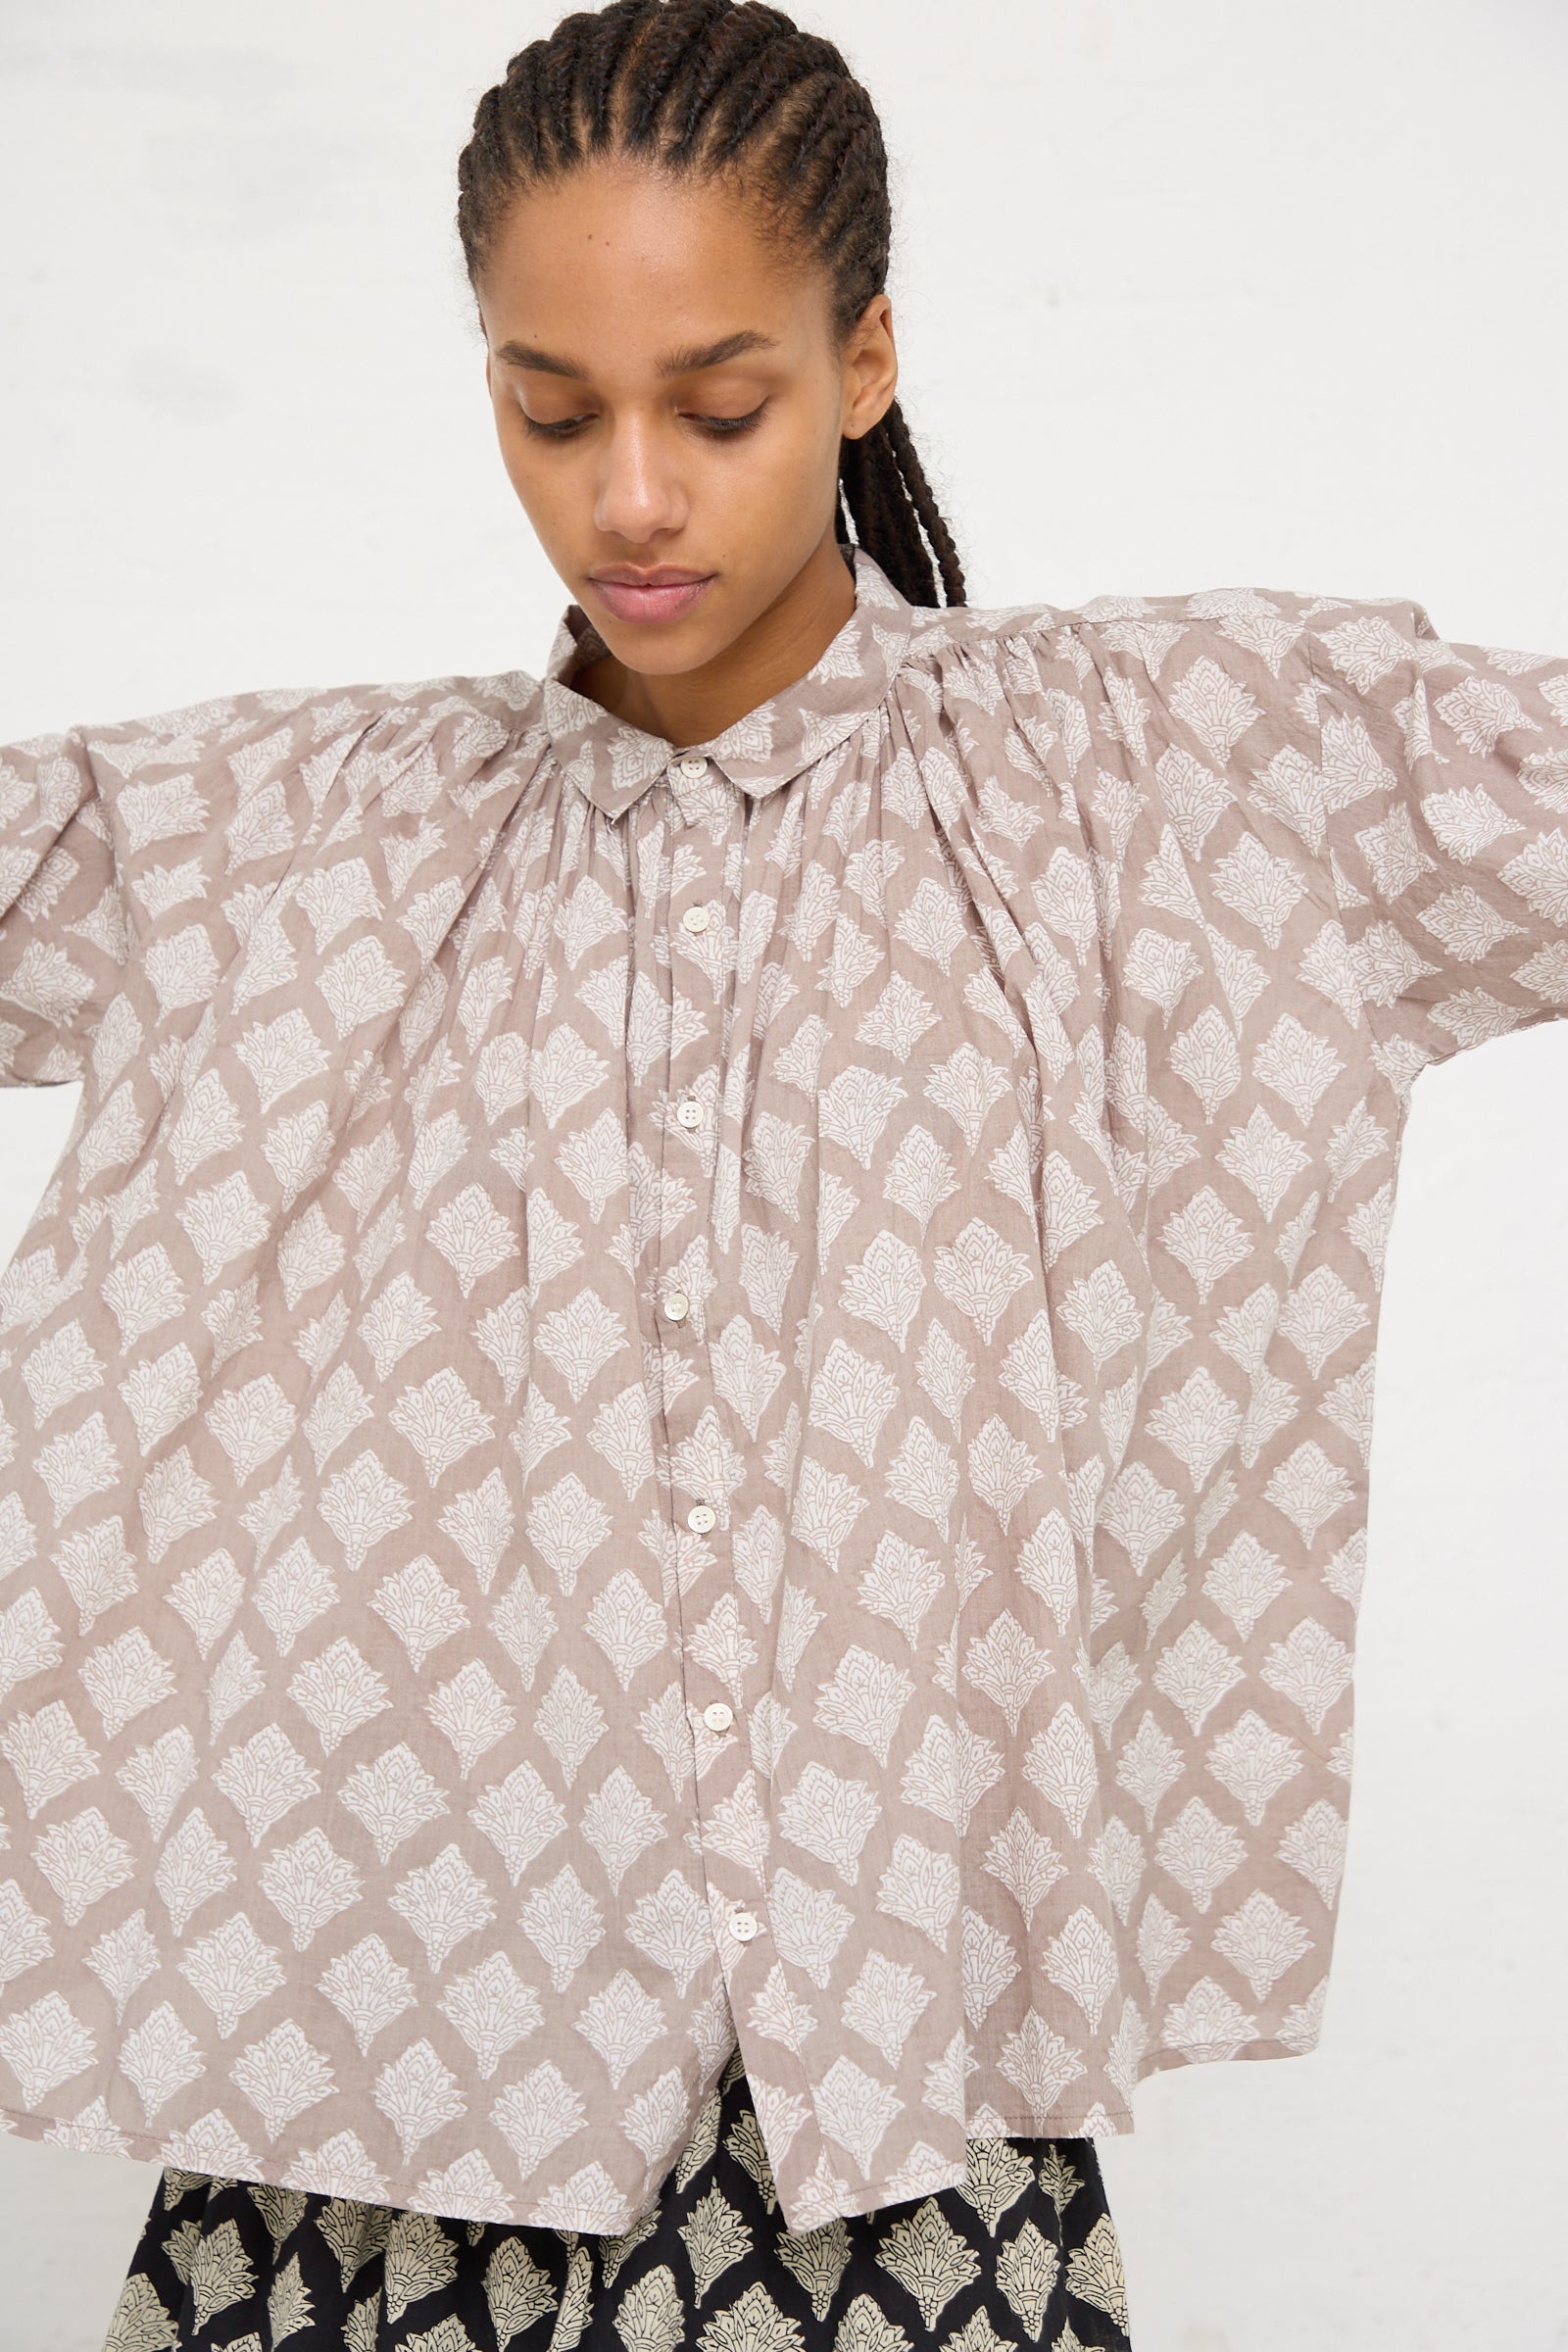 A woman in an Ichi Antiquités Woven Cotton Indian Block Print Shirt in Beige with puff sleeves standing against a white background.